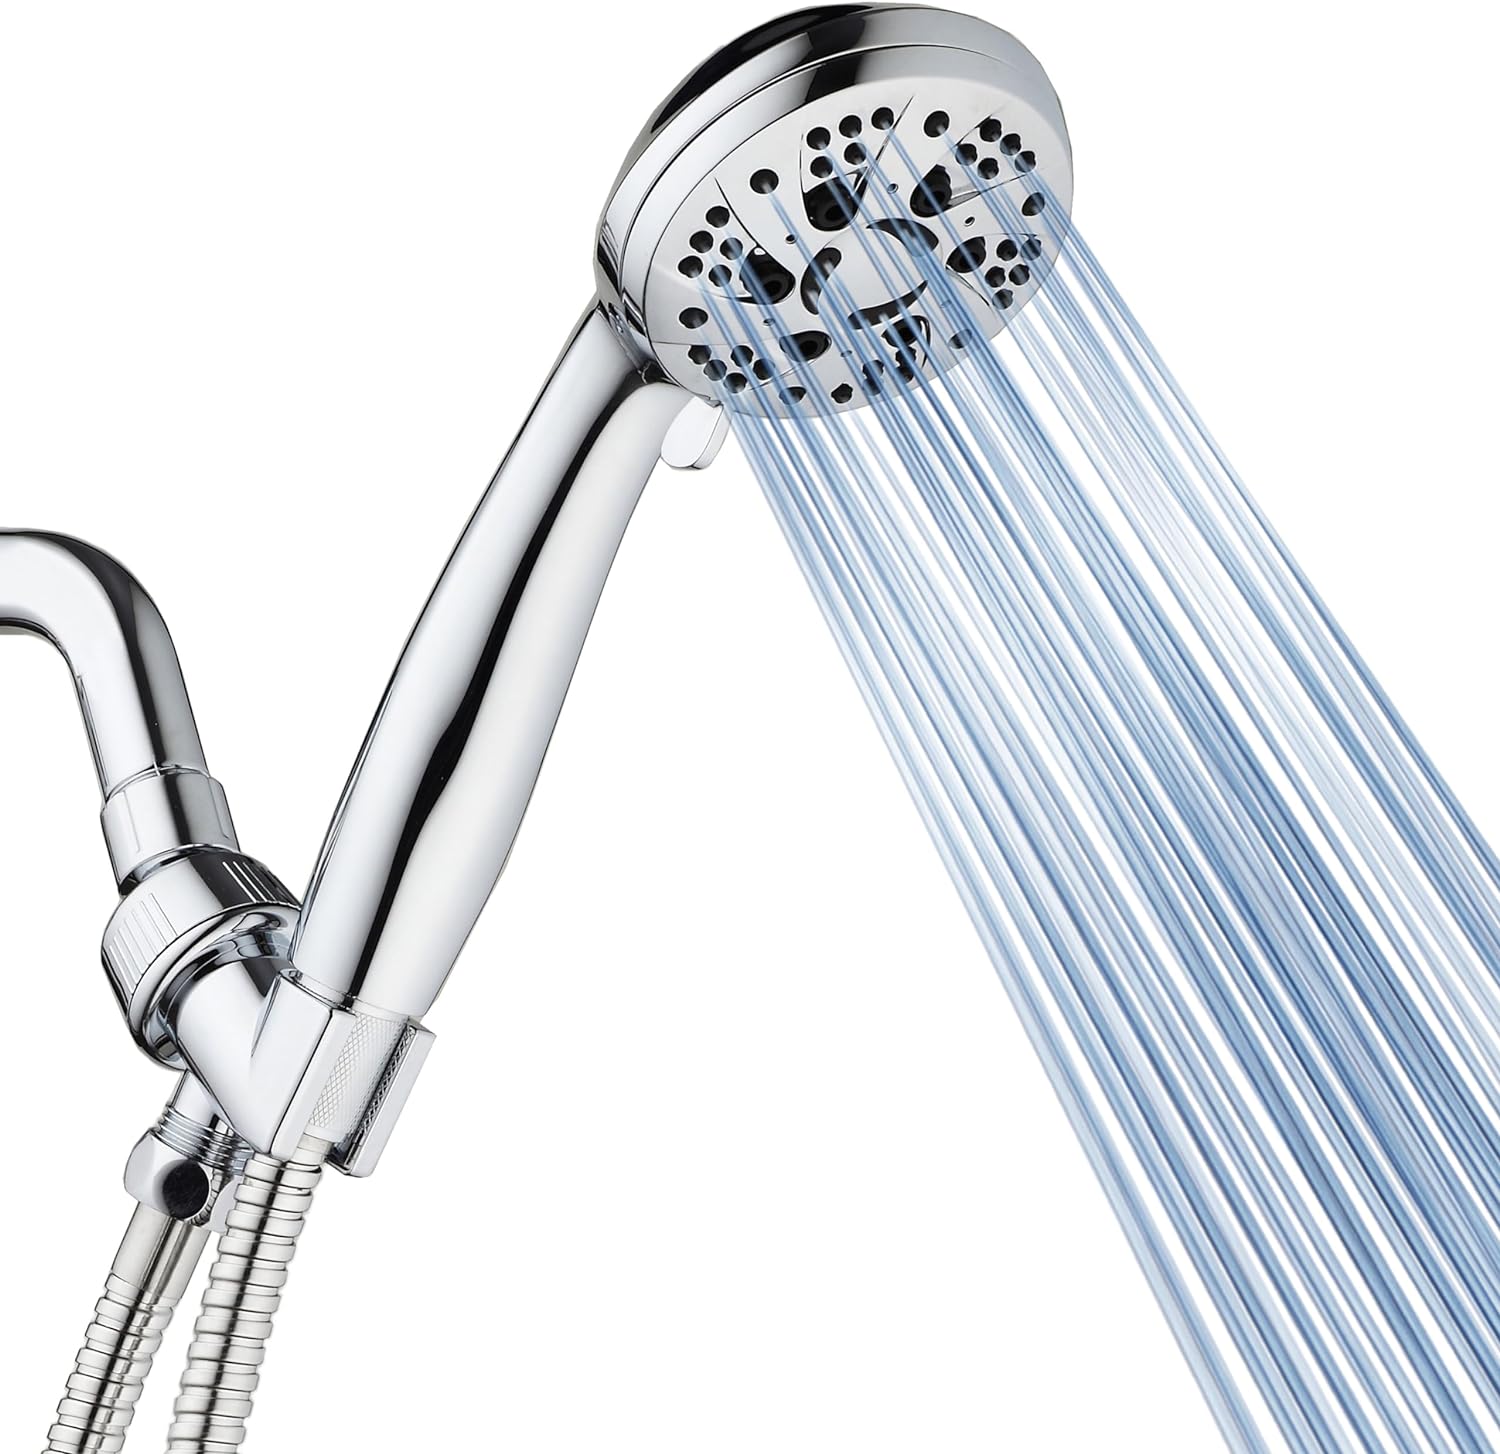 The AquaDance High Pressure 6-Setting Handheld Shower has transformed my shower experience entirely! Its 3.5